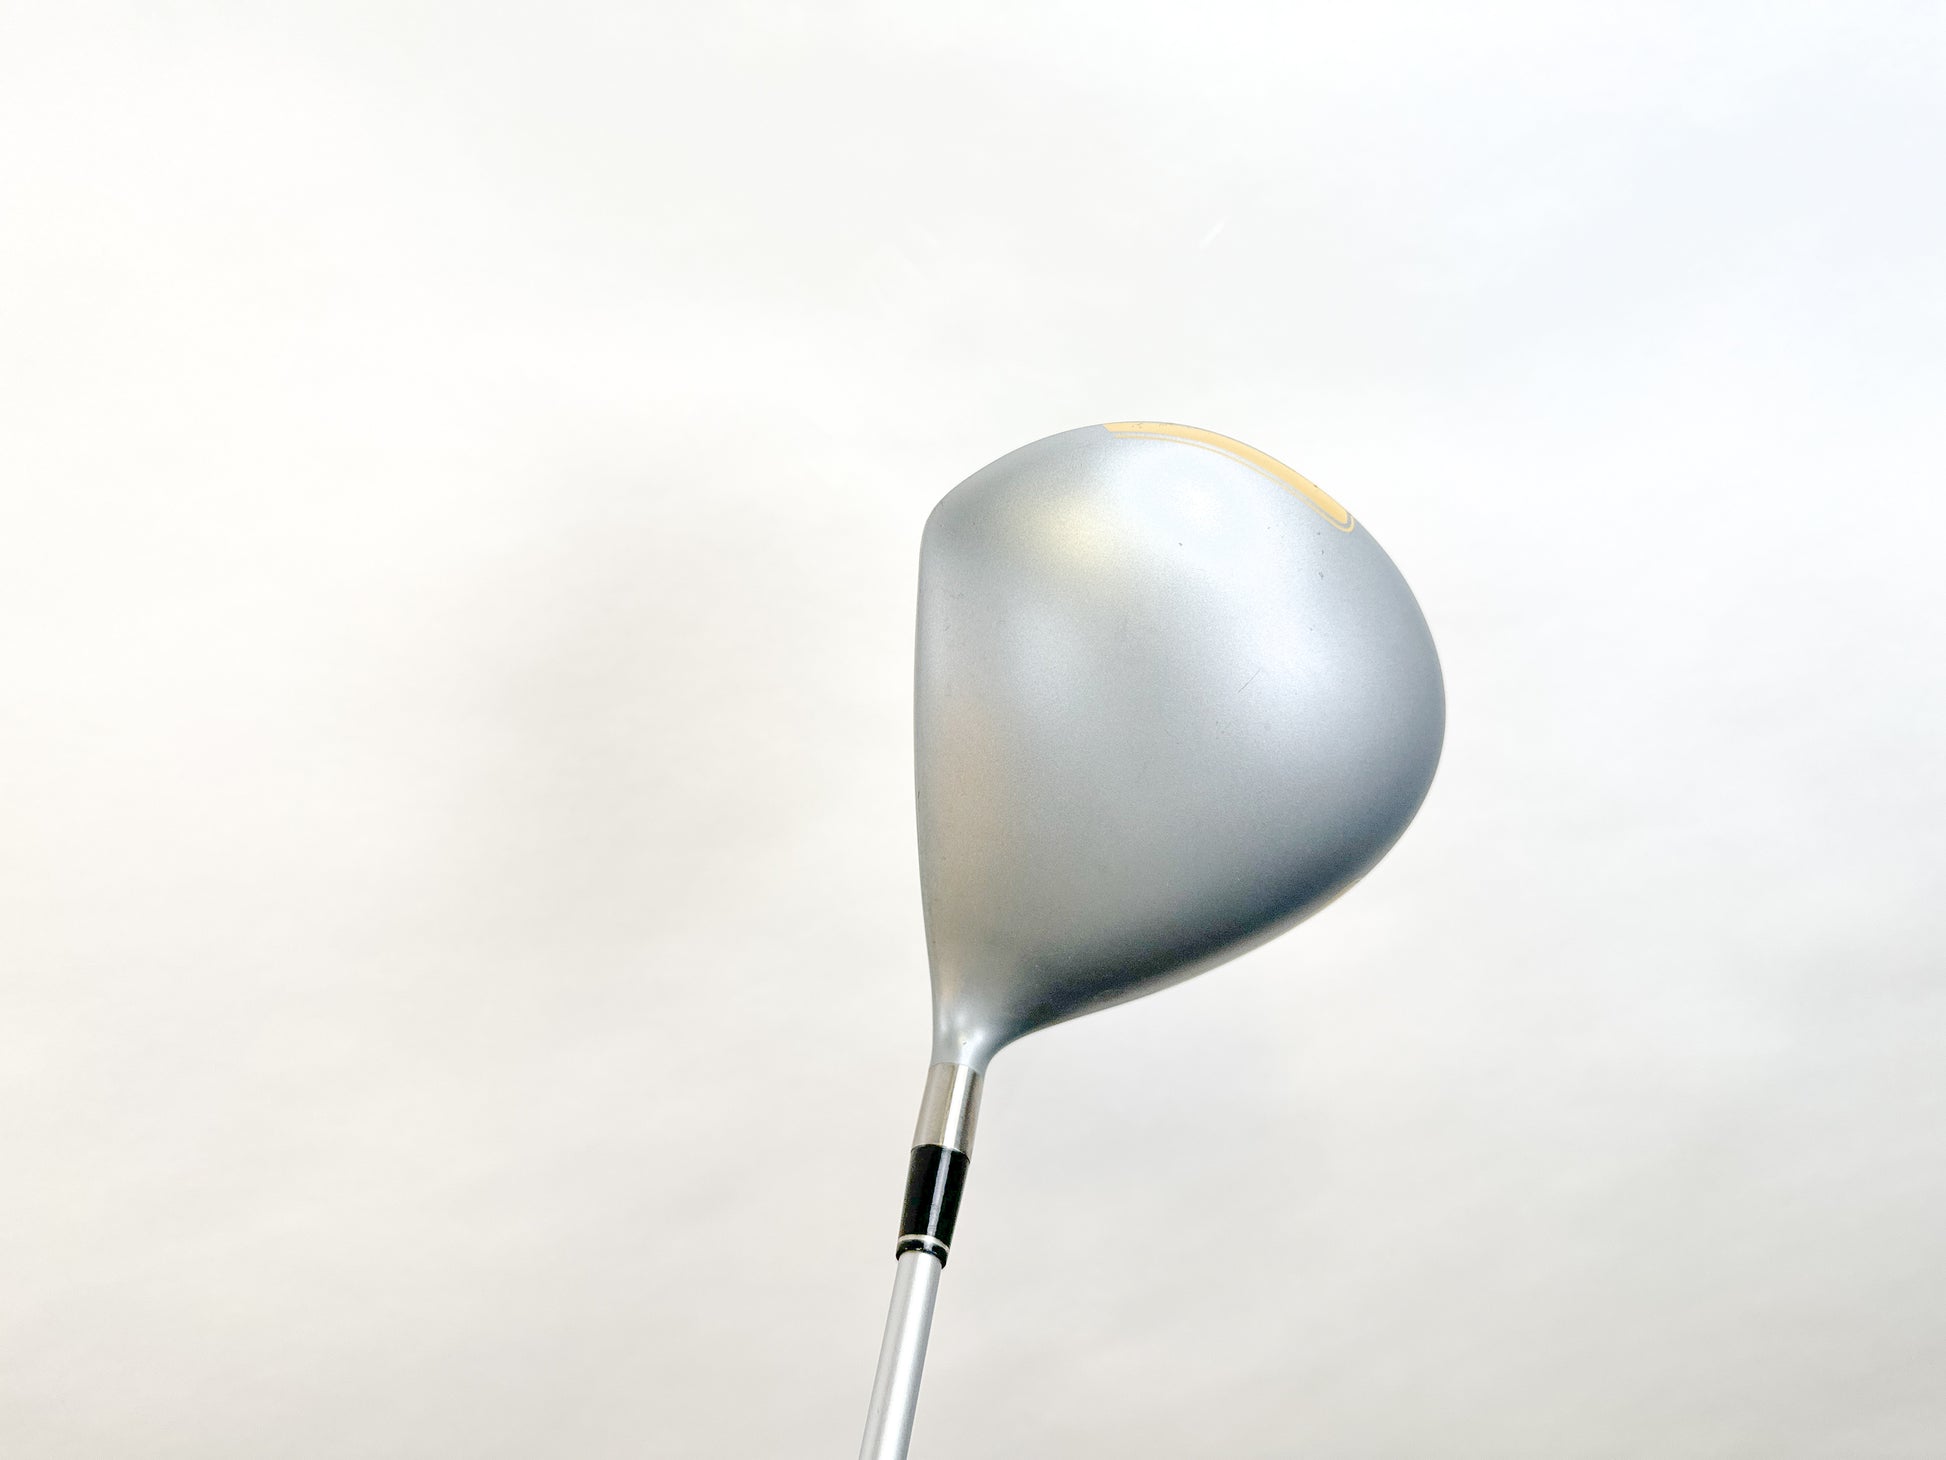 Used Adams Idea Almond Driver - Right-Handed - Not Specified Degrees - Ladies Flex-Next Round